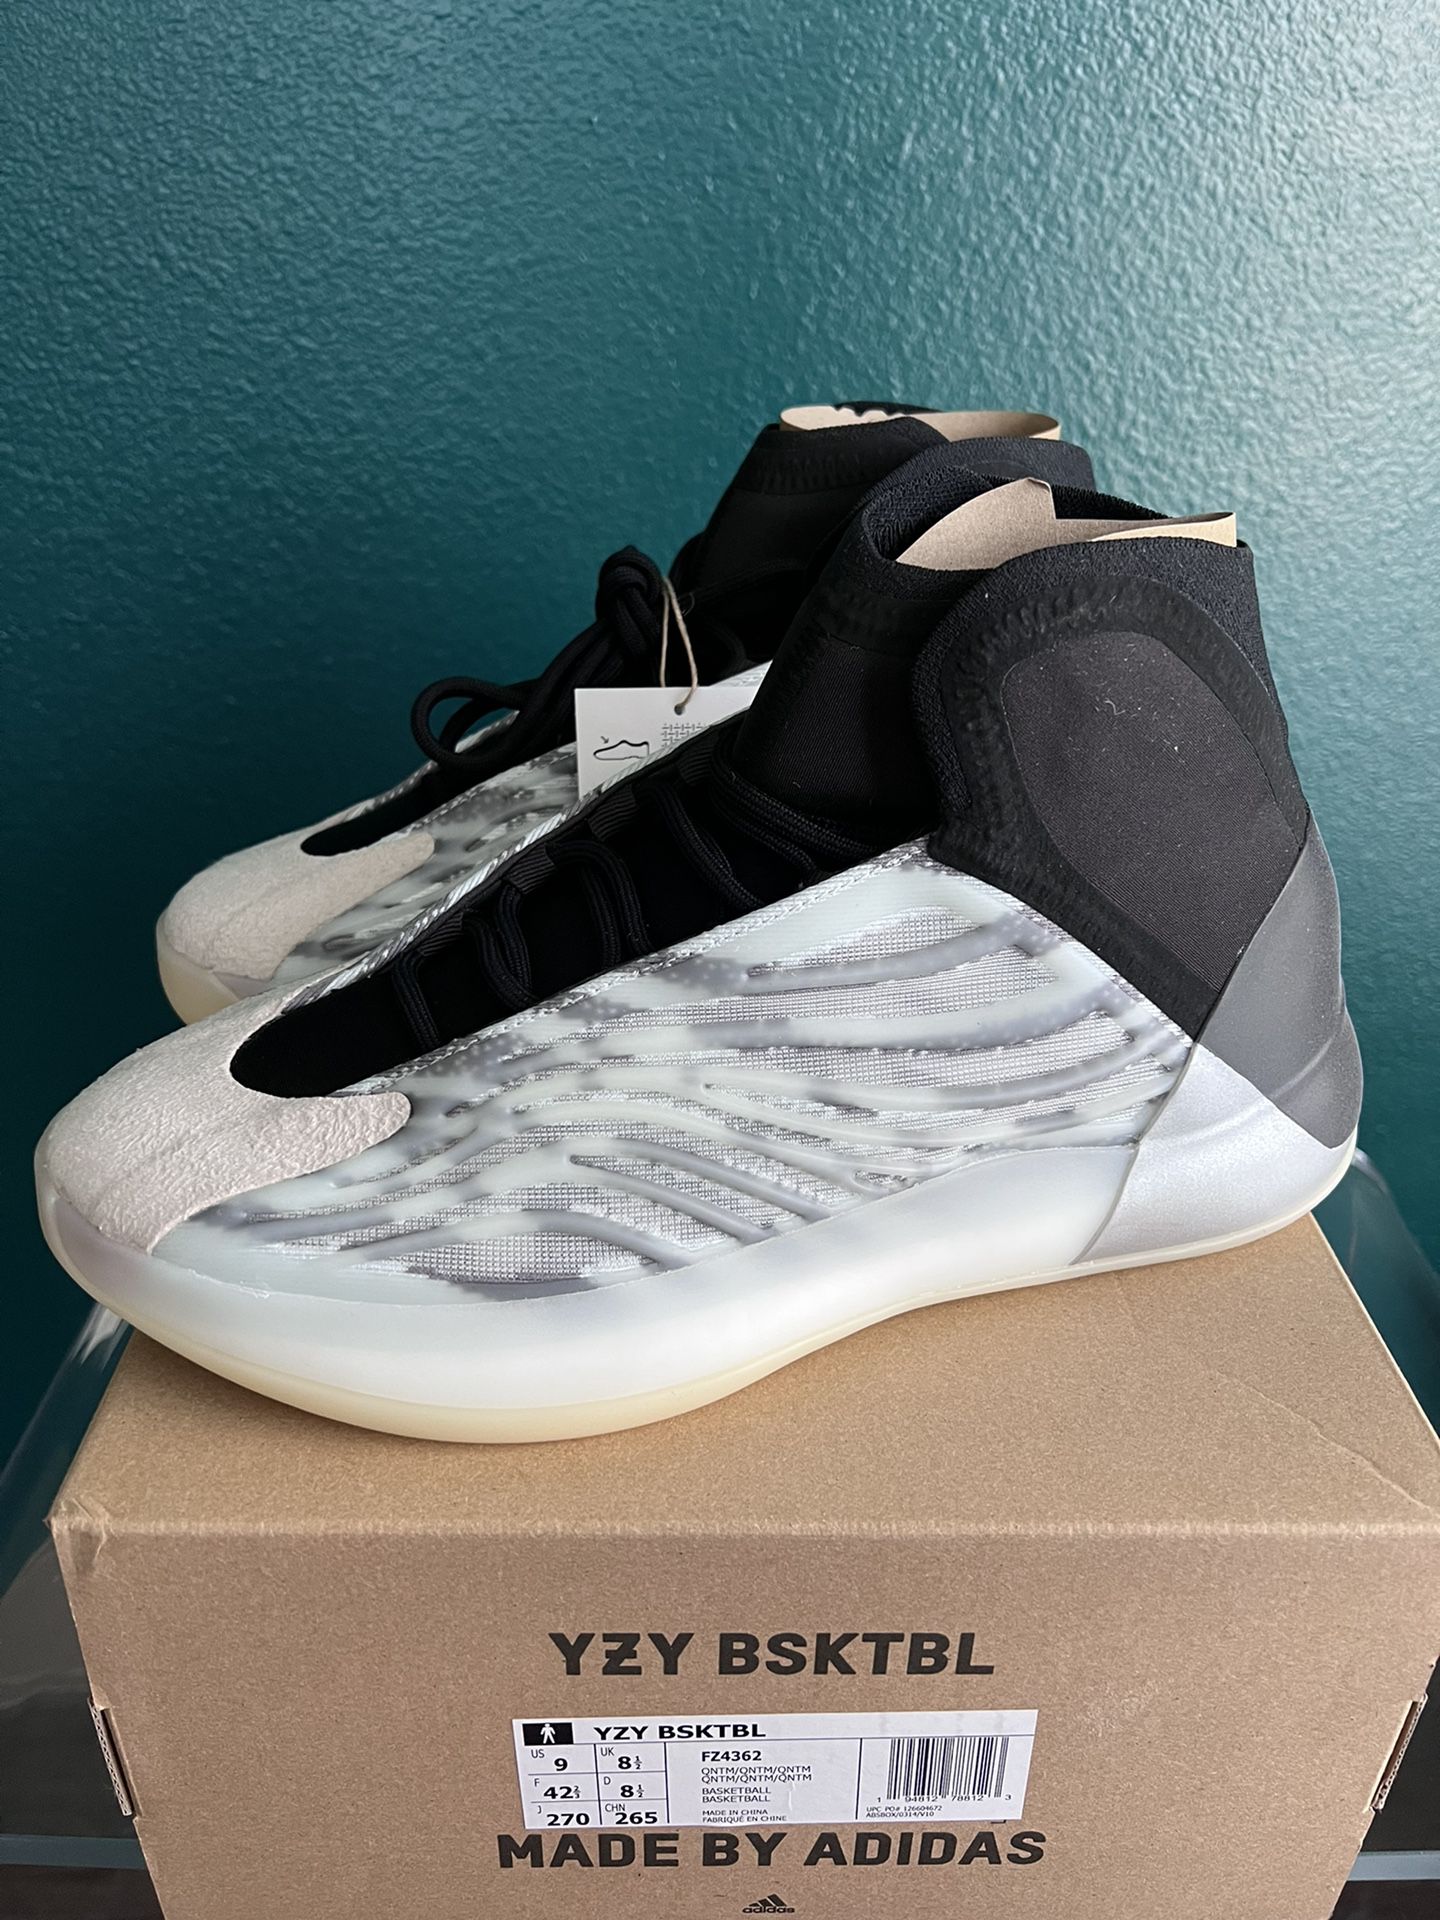 Adidas Quantum Basketball Size 9 for Sale in Addison, TX - OfferUp